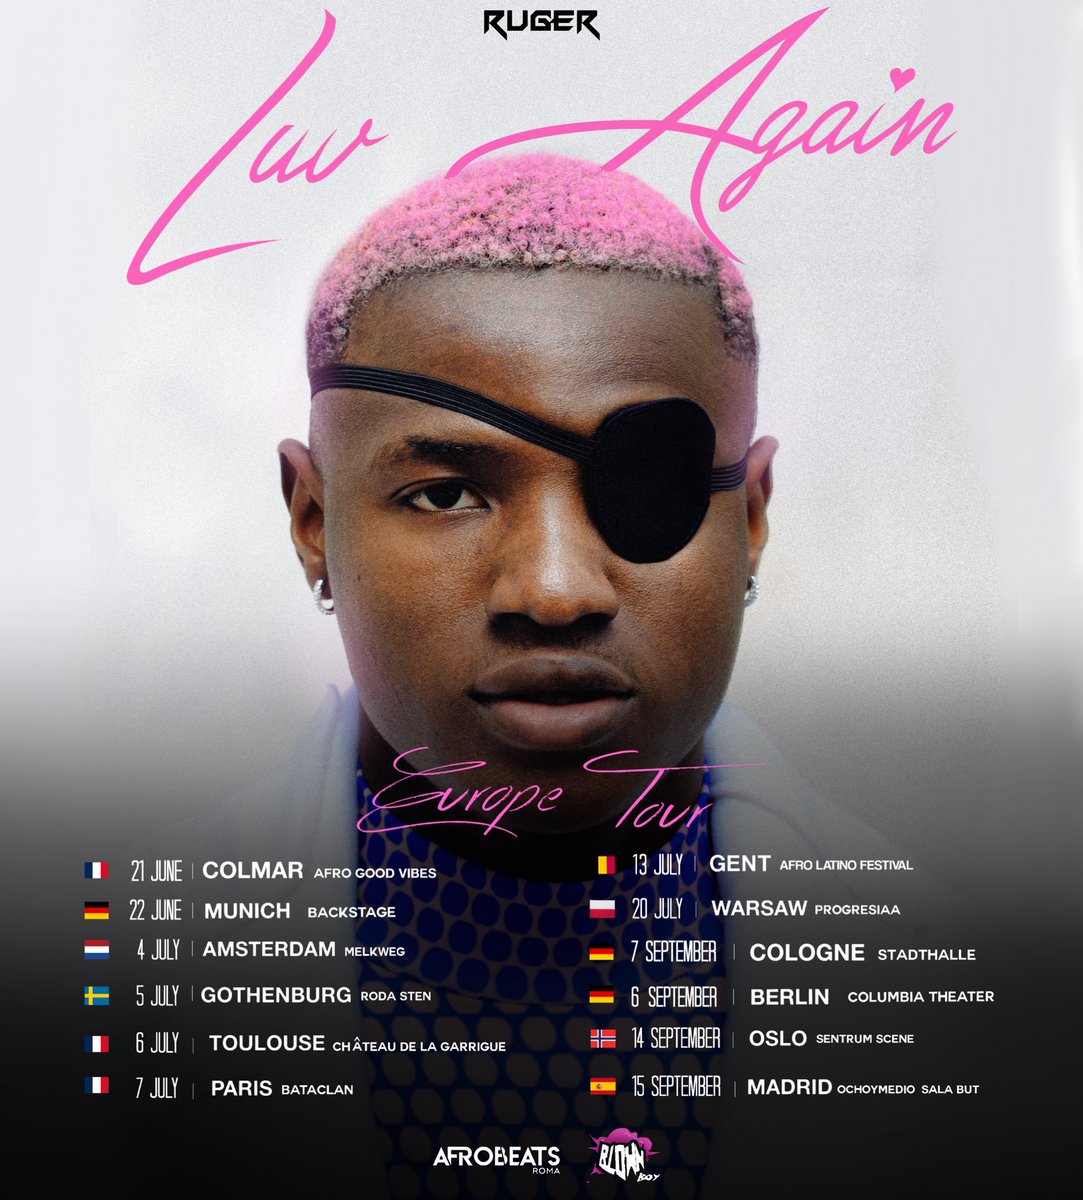 New cities added, different sounds, mixed feelings, one Blown Boy ready to LUV AGAIN 💞 Check for the city closest to you and experience RUGER in his full Glory! rugereurope.afrobeatsroma.live